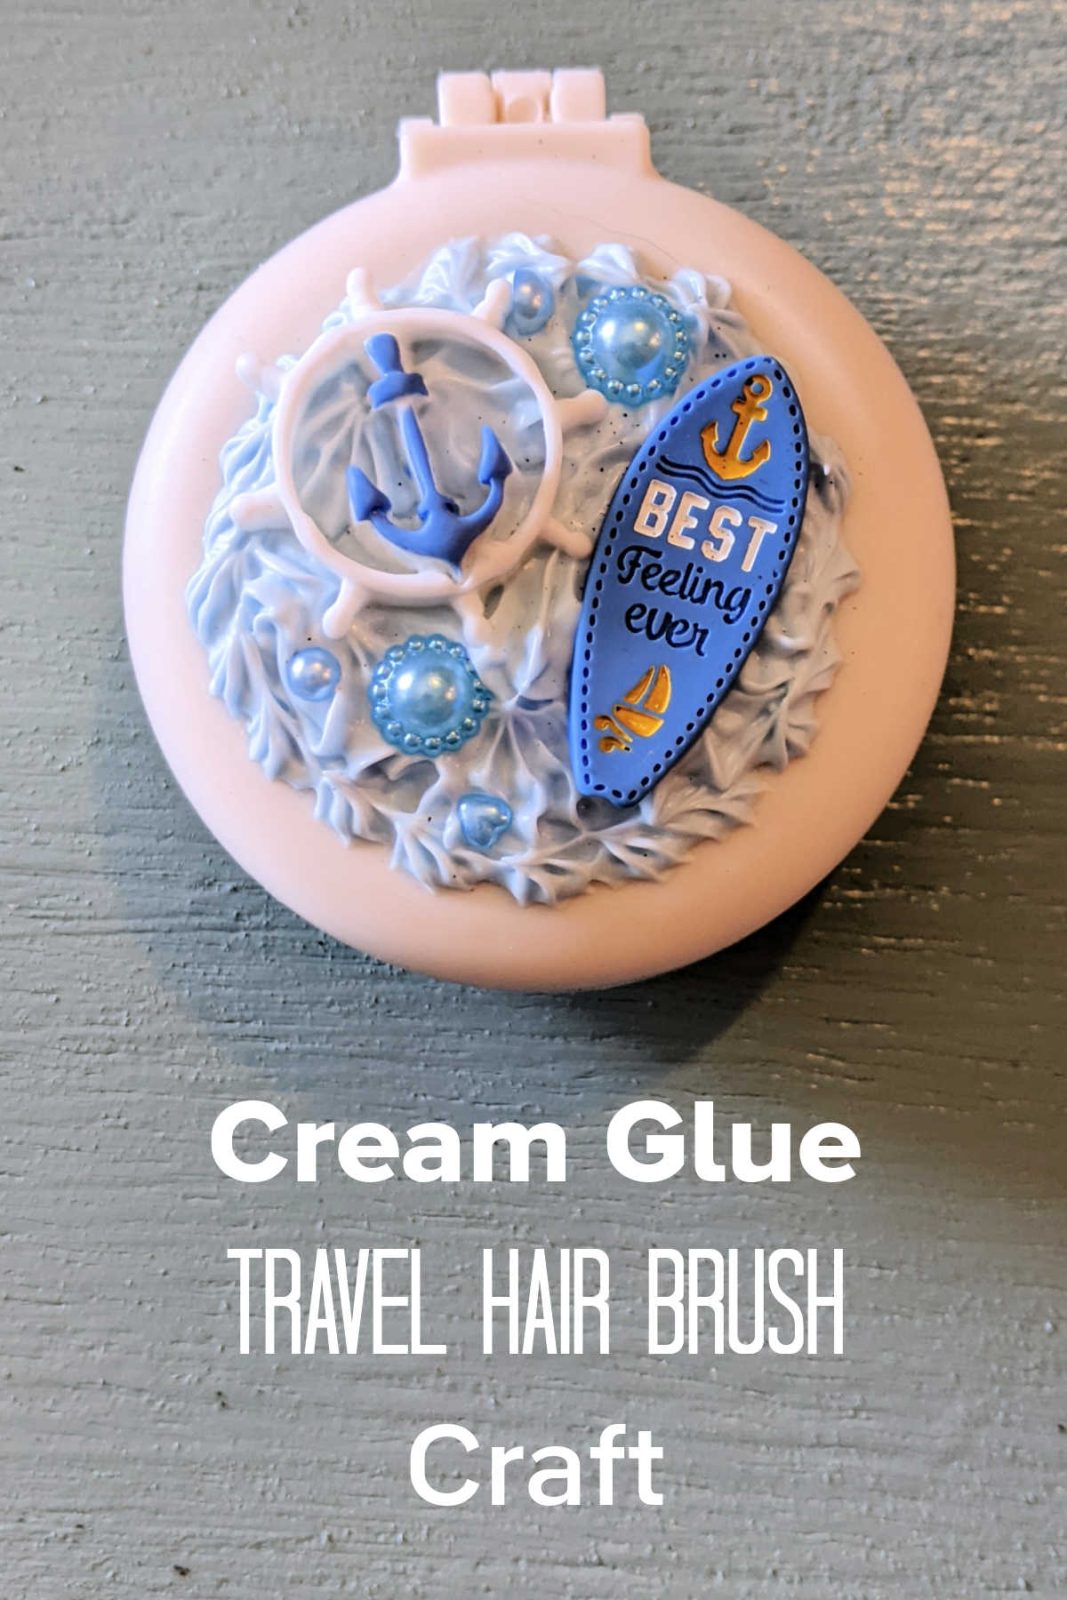 Calling all beach bums and cruise vacationers! Craft your dream hairbrush for sandy adventures with this easy and fun Beach Vacation Hair Brush Craft! Perfect for all ages, this project lets you create a customizable hair brush with whipped cream glue, charms, and pearls. Personalize your brush to reflect your beach vibes and add a touch of ocean magic to your next vacation!